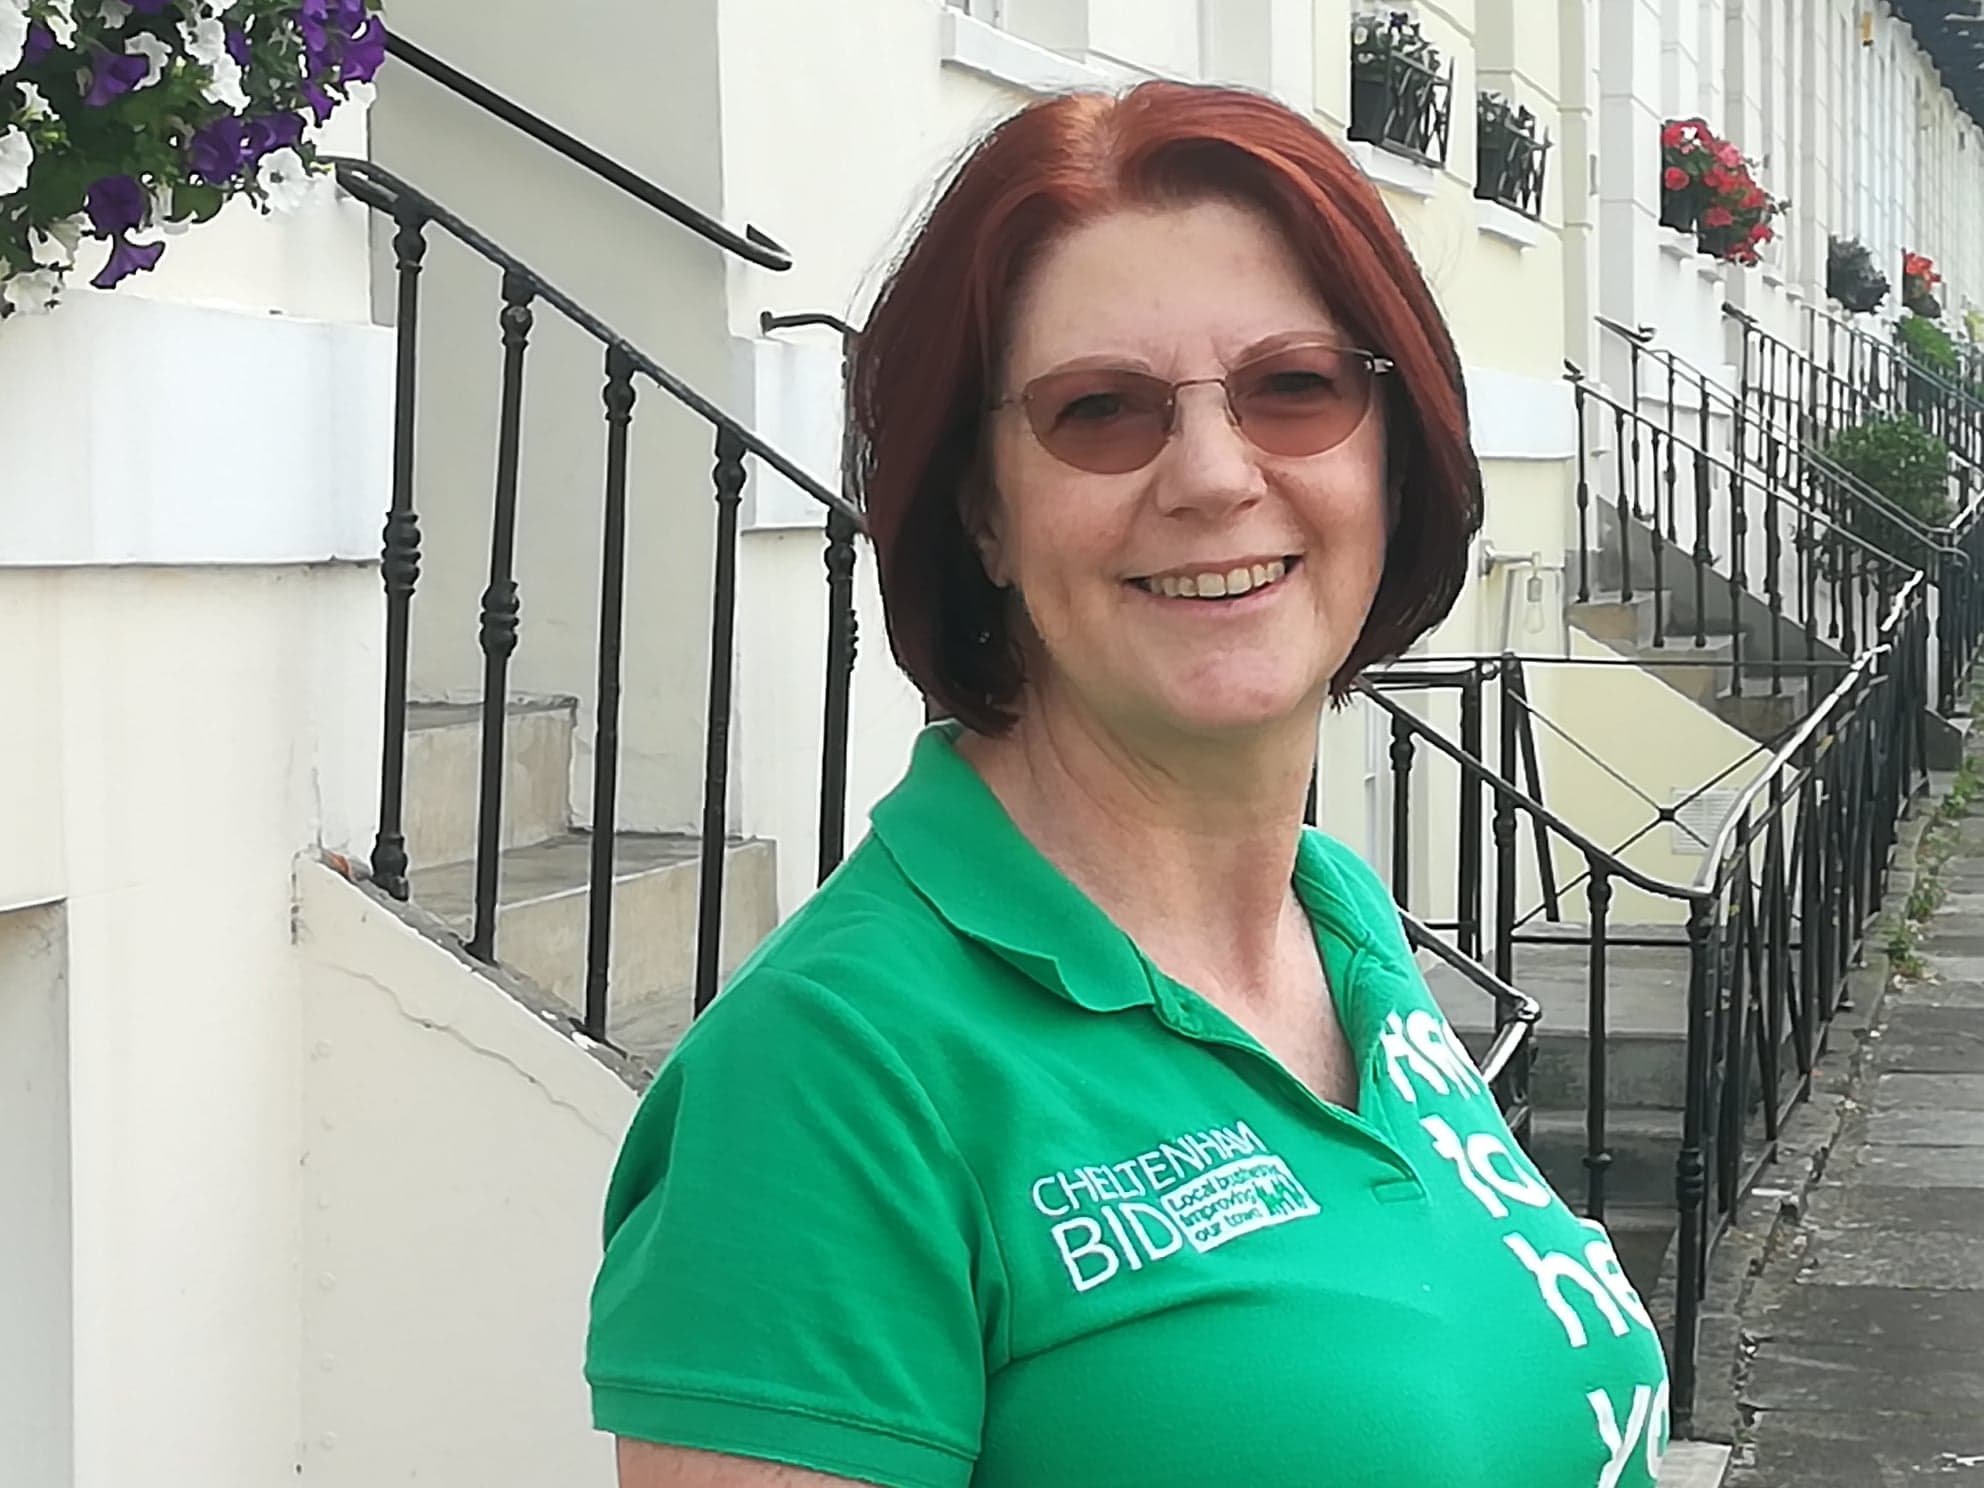 Jo-Anne Hale pictured outside The Logical Ultilities Company in BID green polo shirt with Cheltenham BID logo.